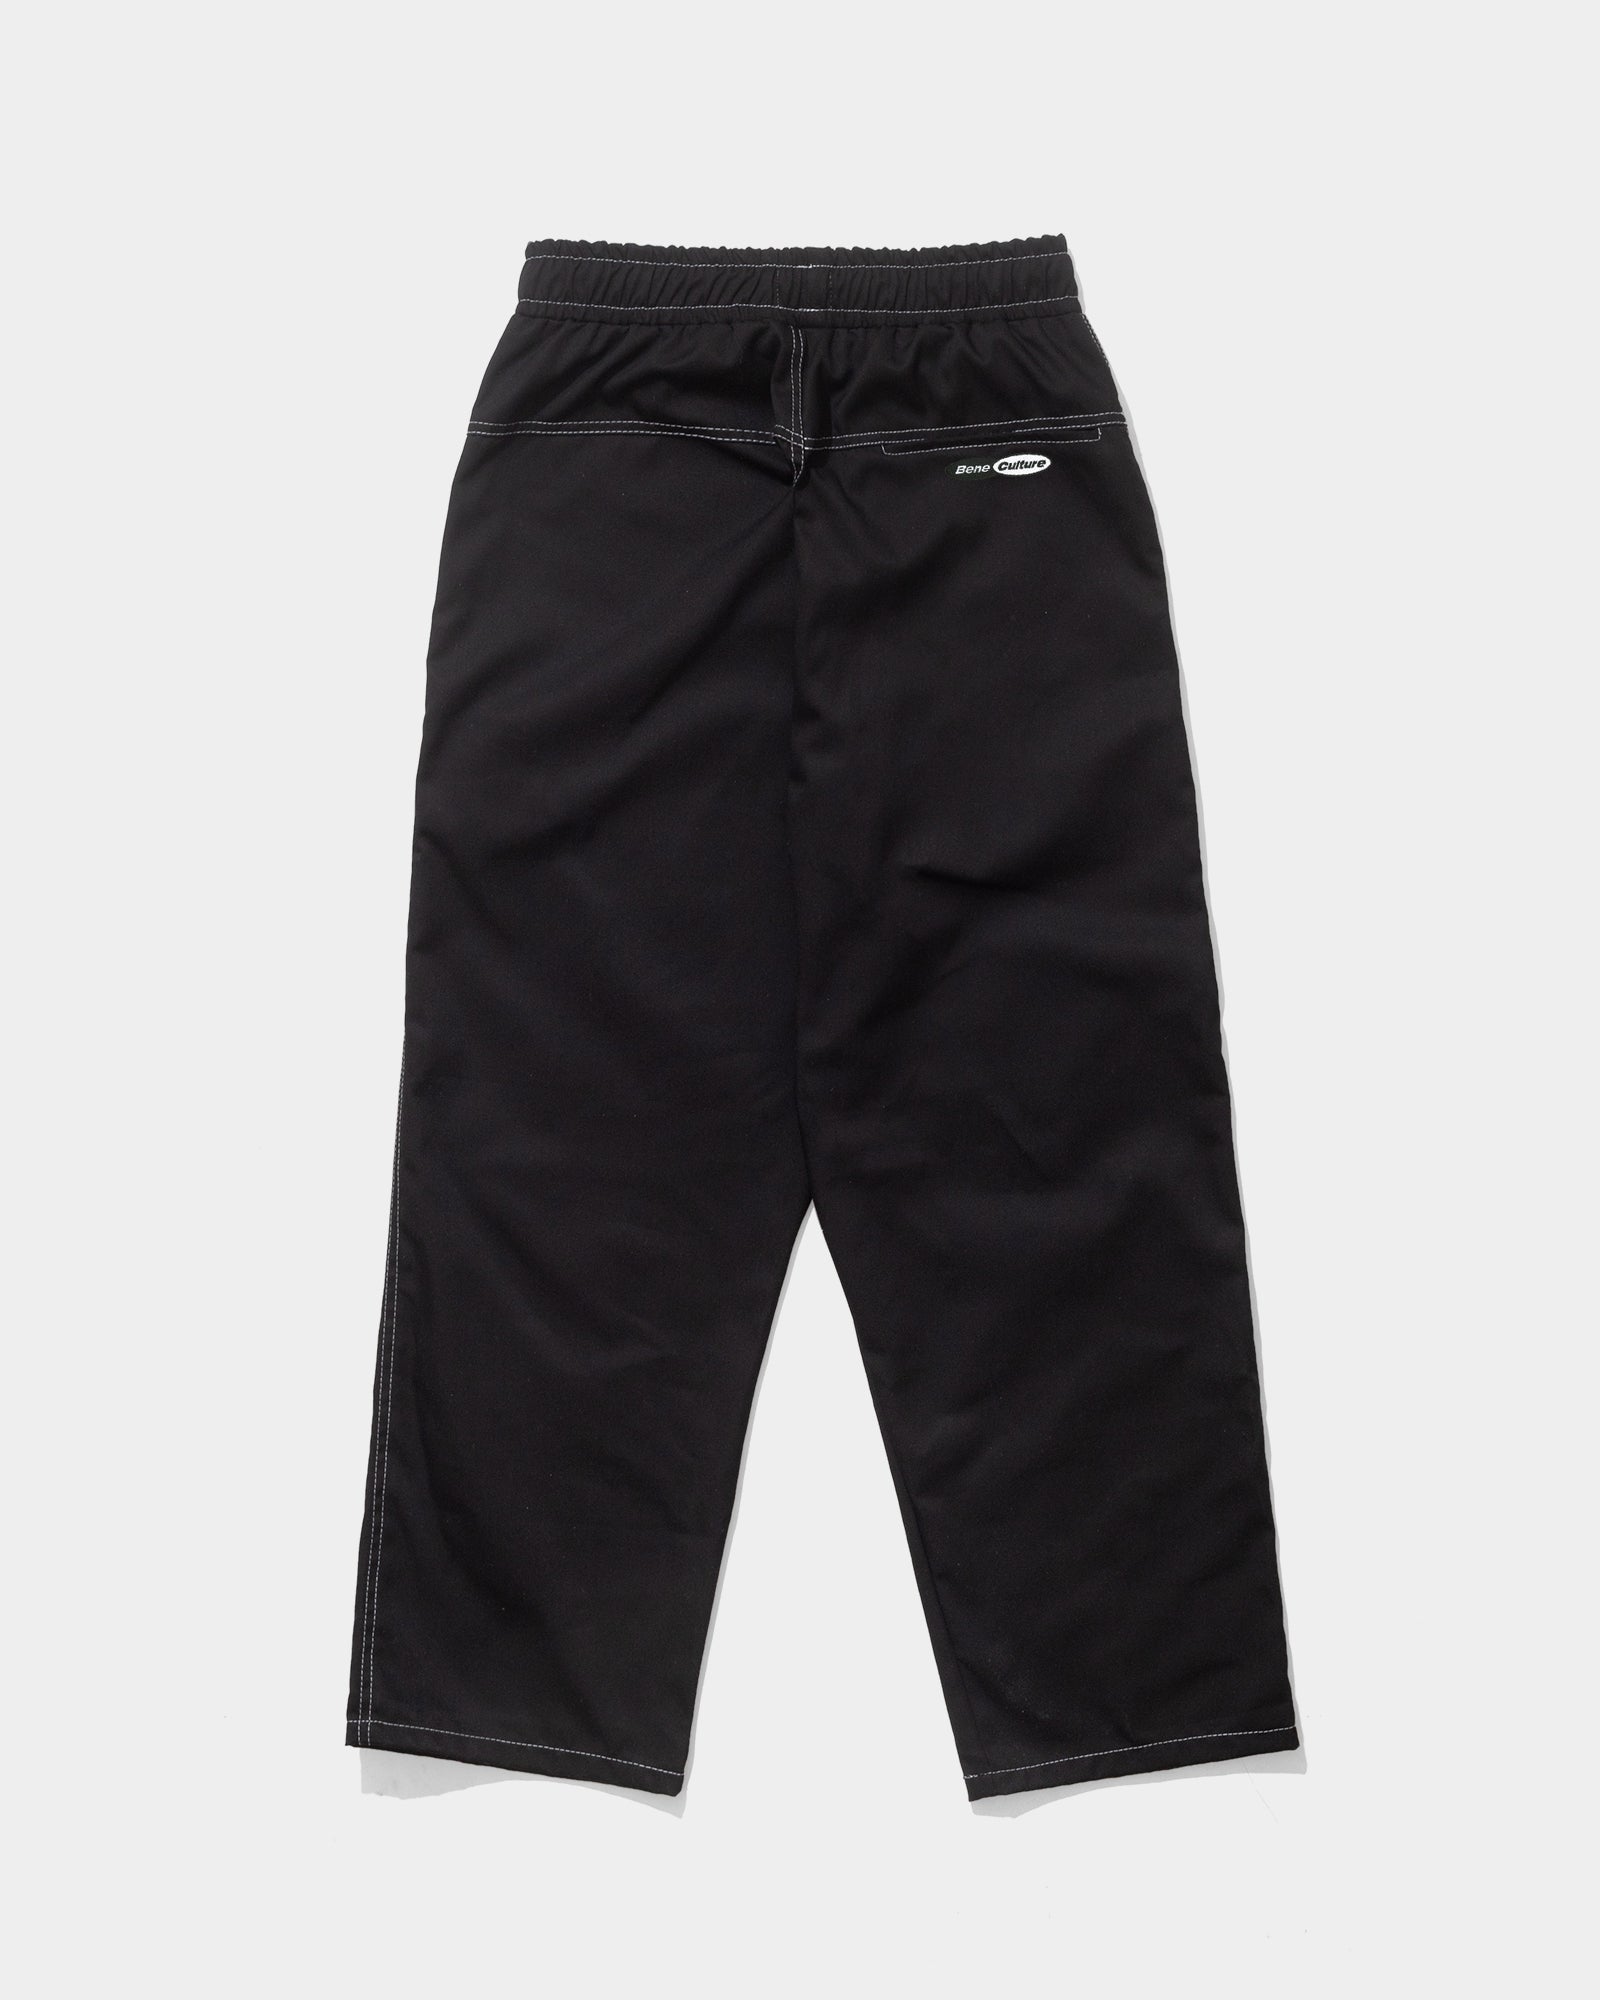 All-Rounder Pants (Black)